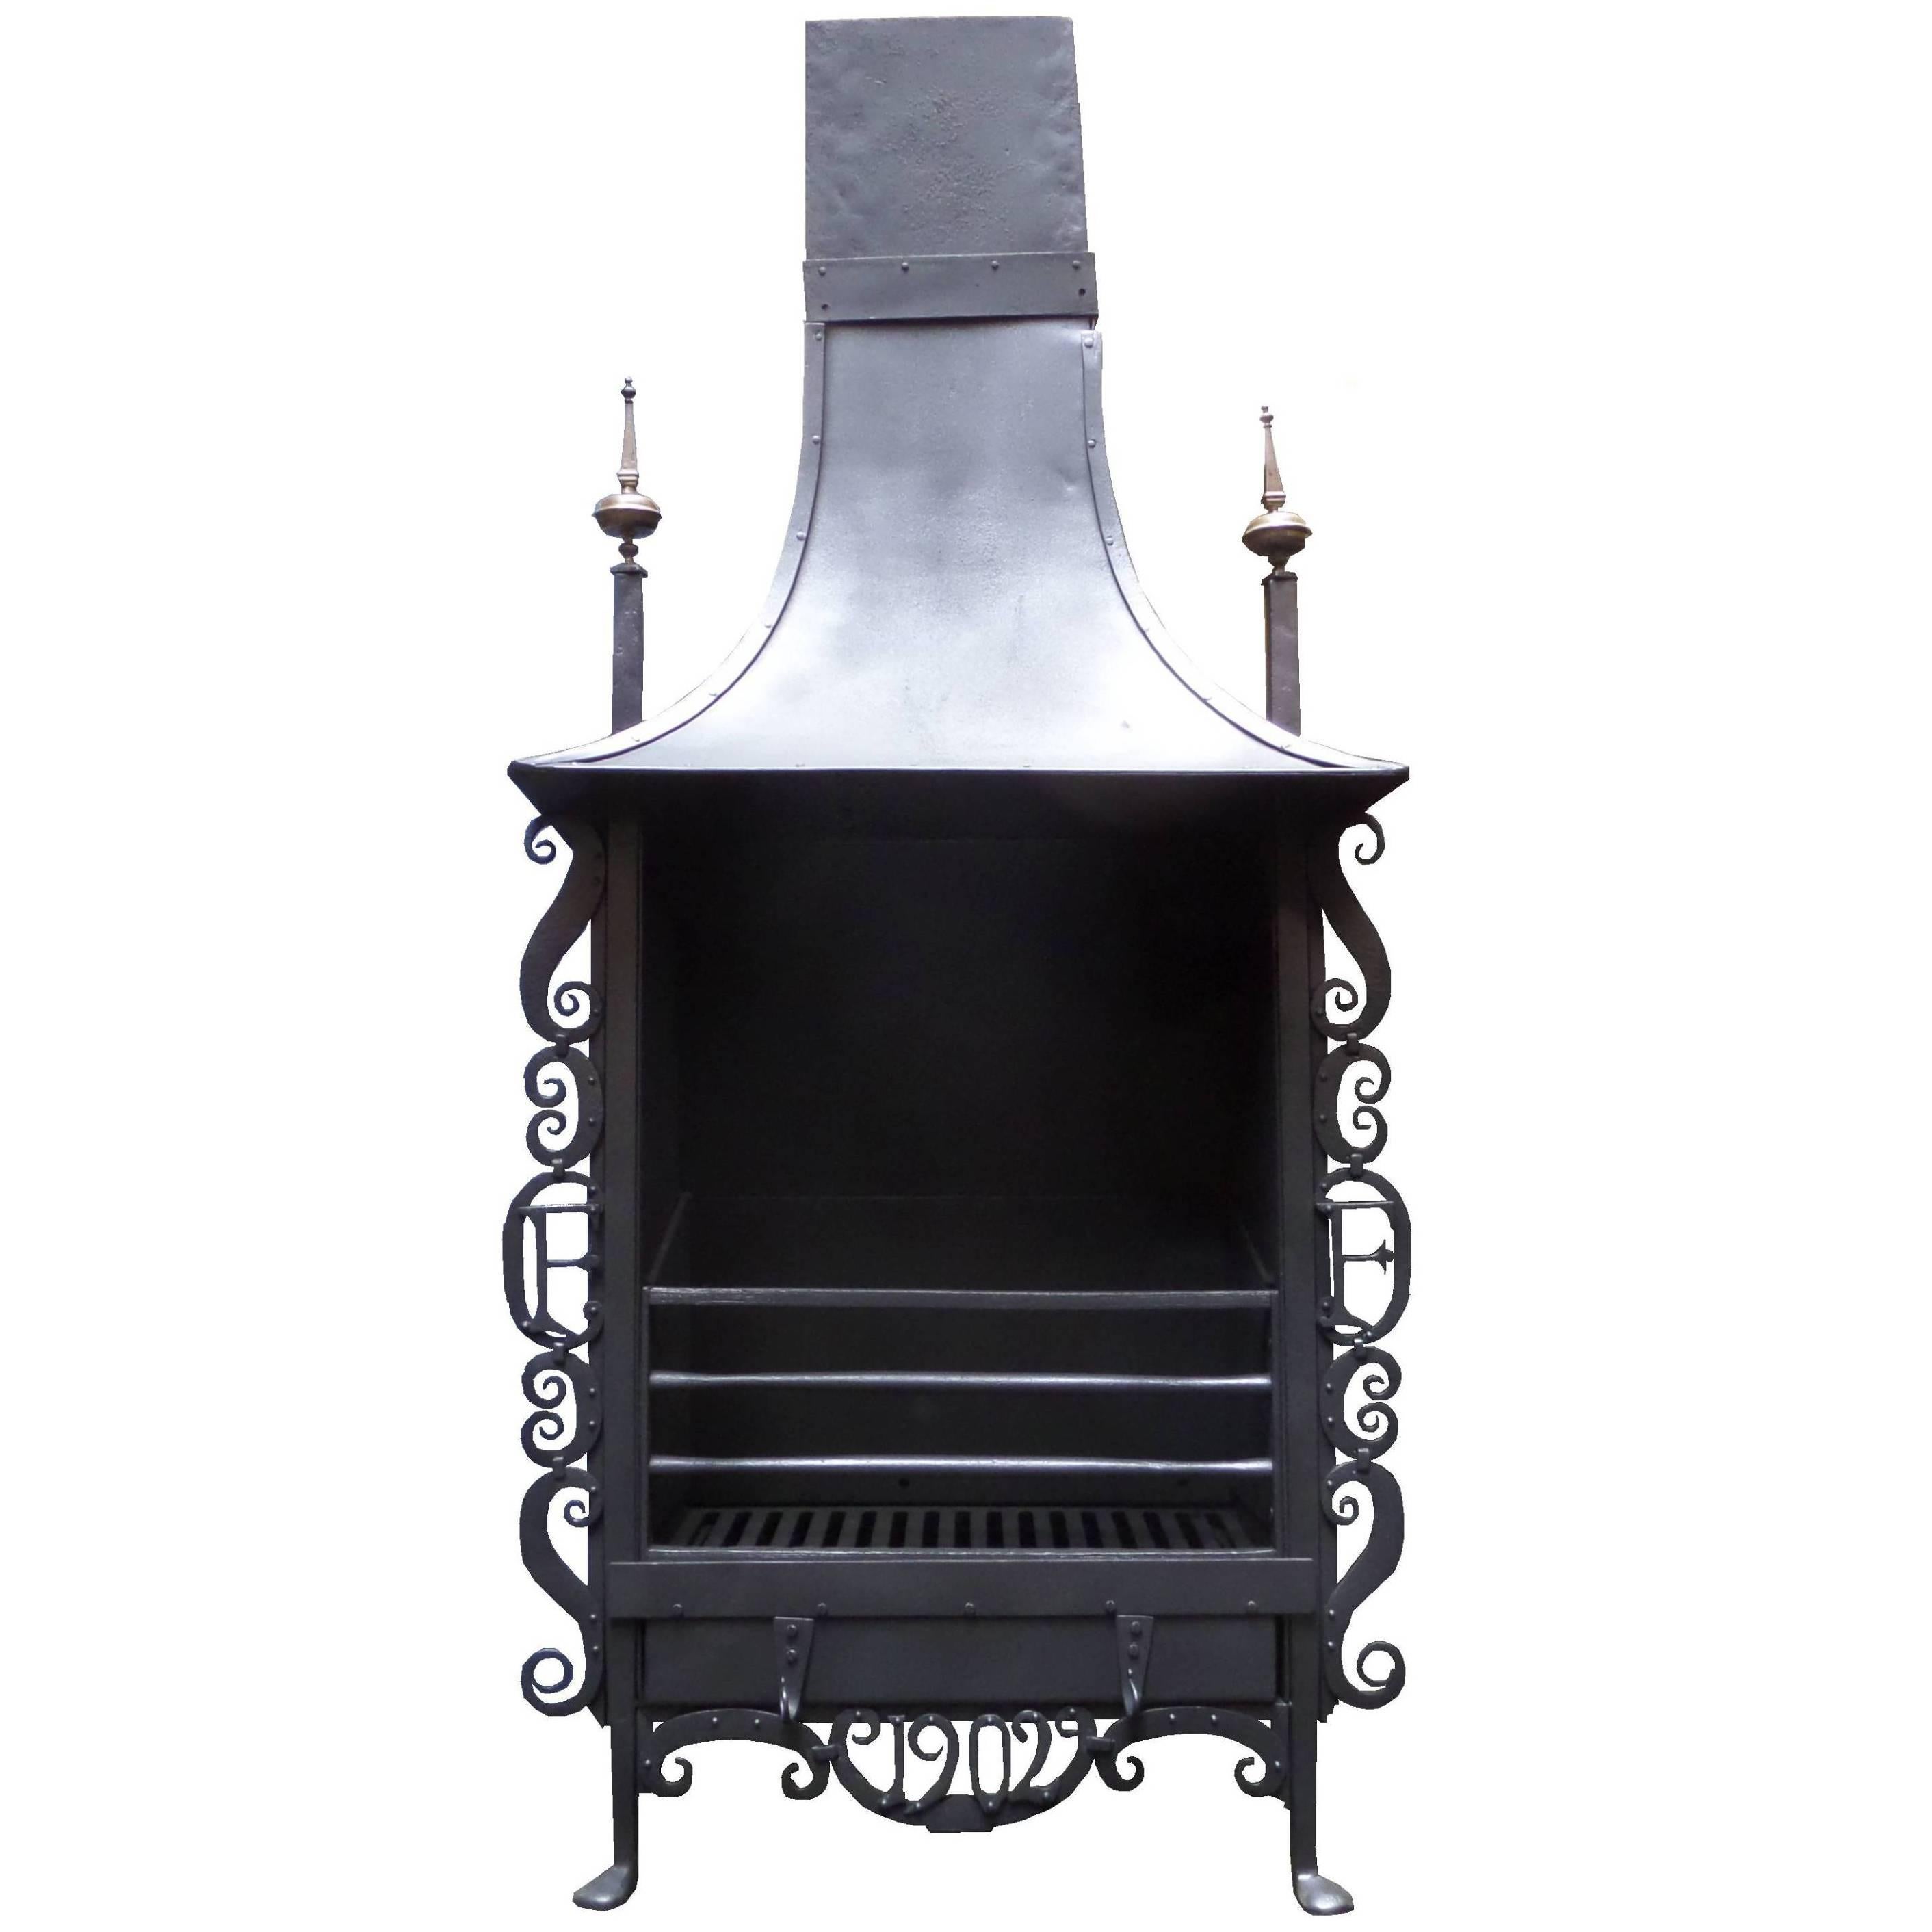 20th Century Edwardian Arts & Craft Canopy Fireplace Fire Grate For Sale